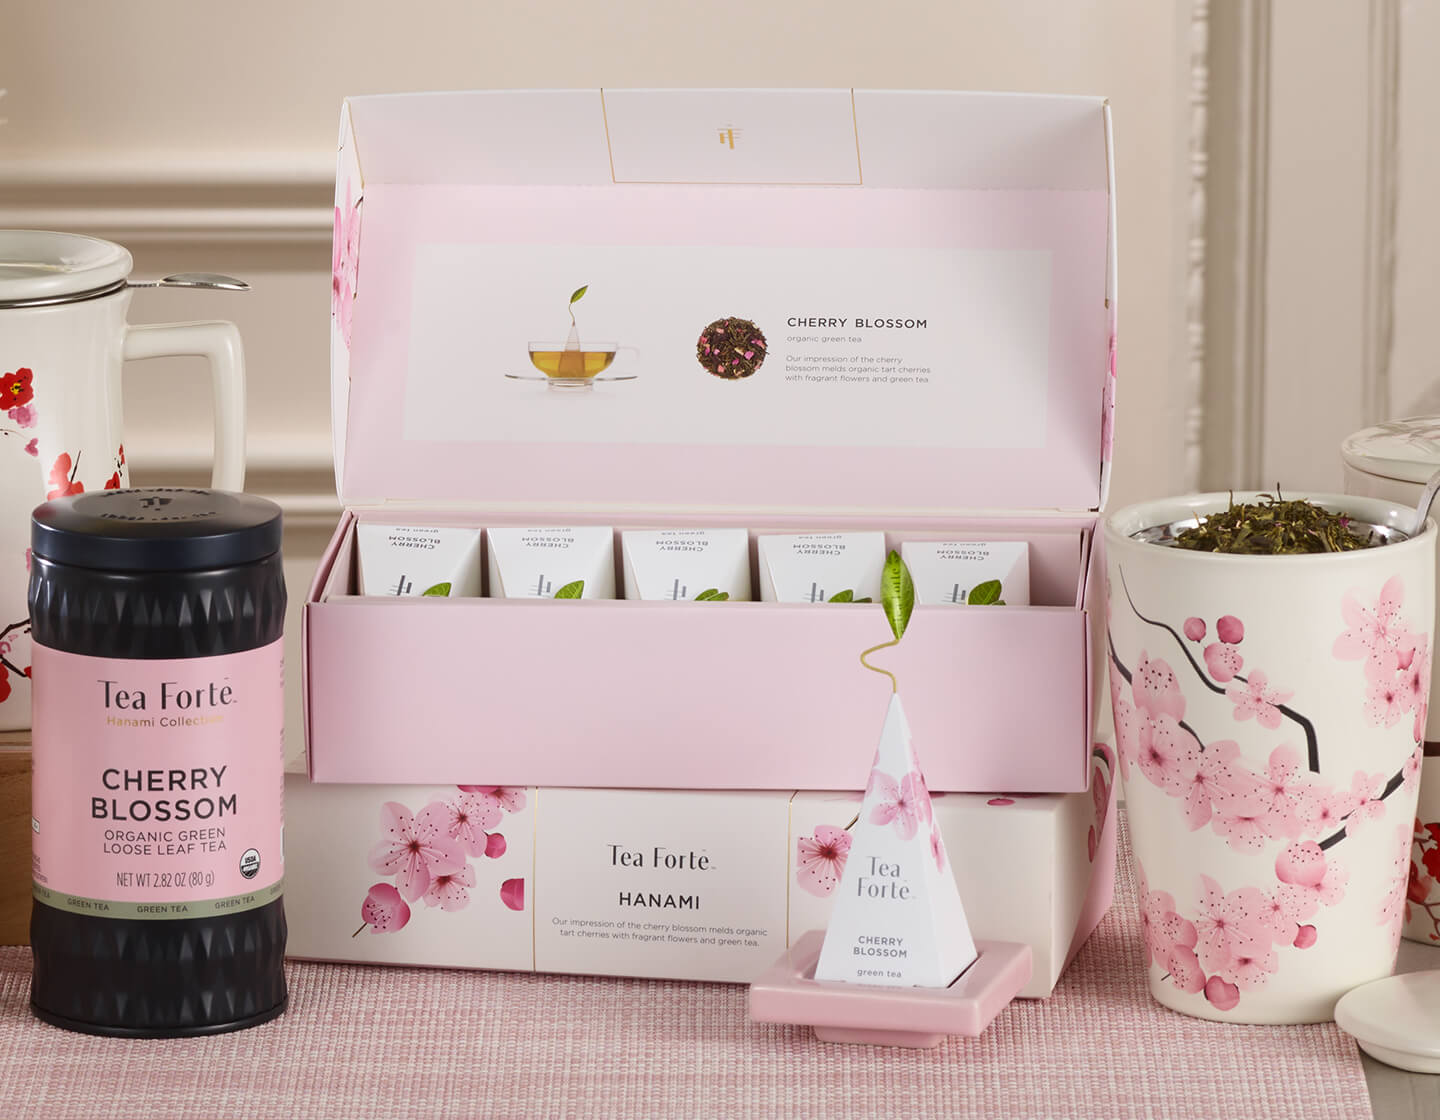 Cherry Blossom and Hanami tea and accessories